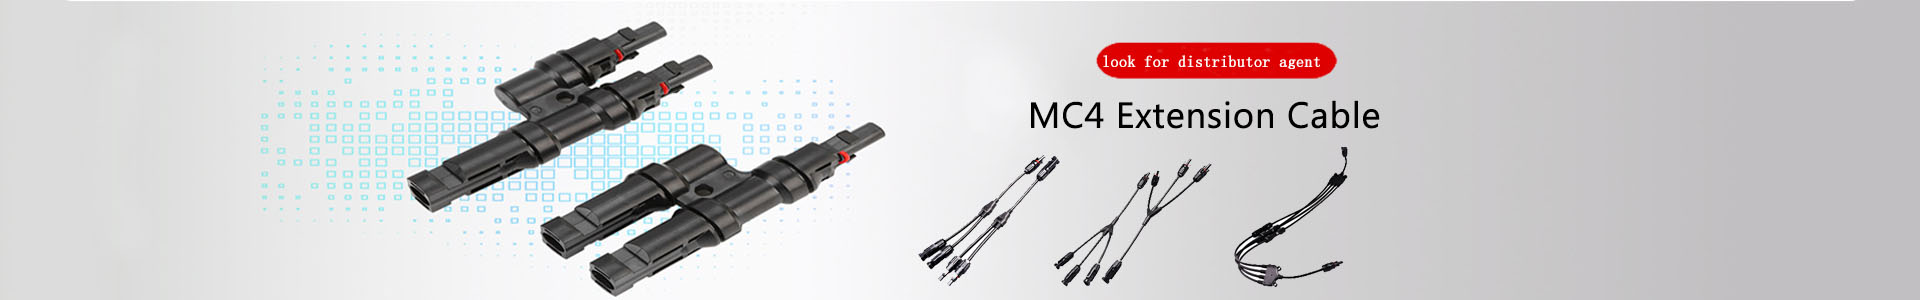 Cambodia Bavet 10MW Solar Project-Solar power plant project-Solar | solar connector,solar branch connector,diode fuse connector,MC4 extnsion cable,H1Z2Z2 solar cable, UL4703 solar cable | Leading manufacturer and supplier of solar pv cables and connectors